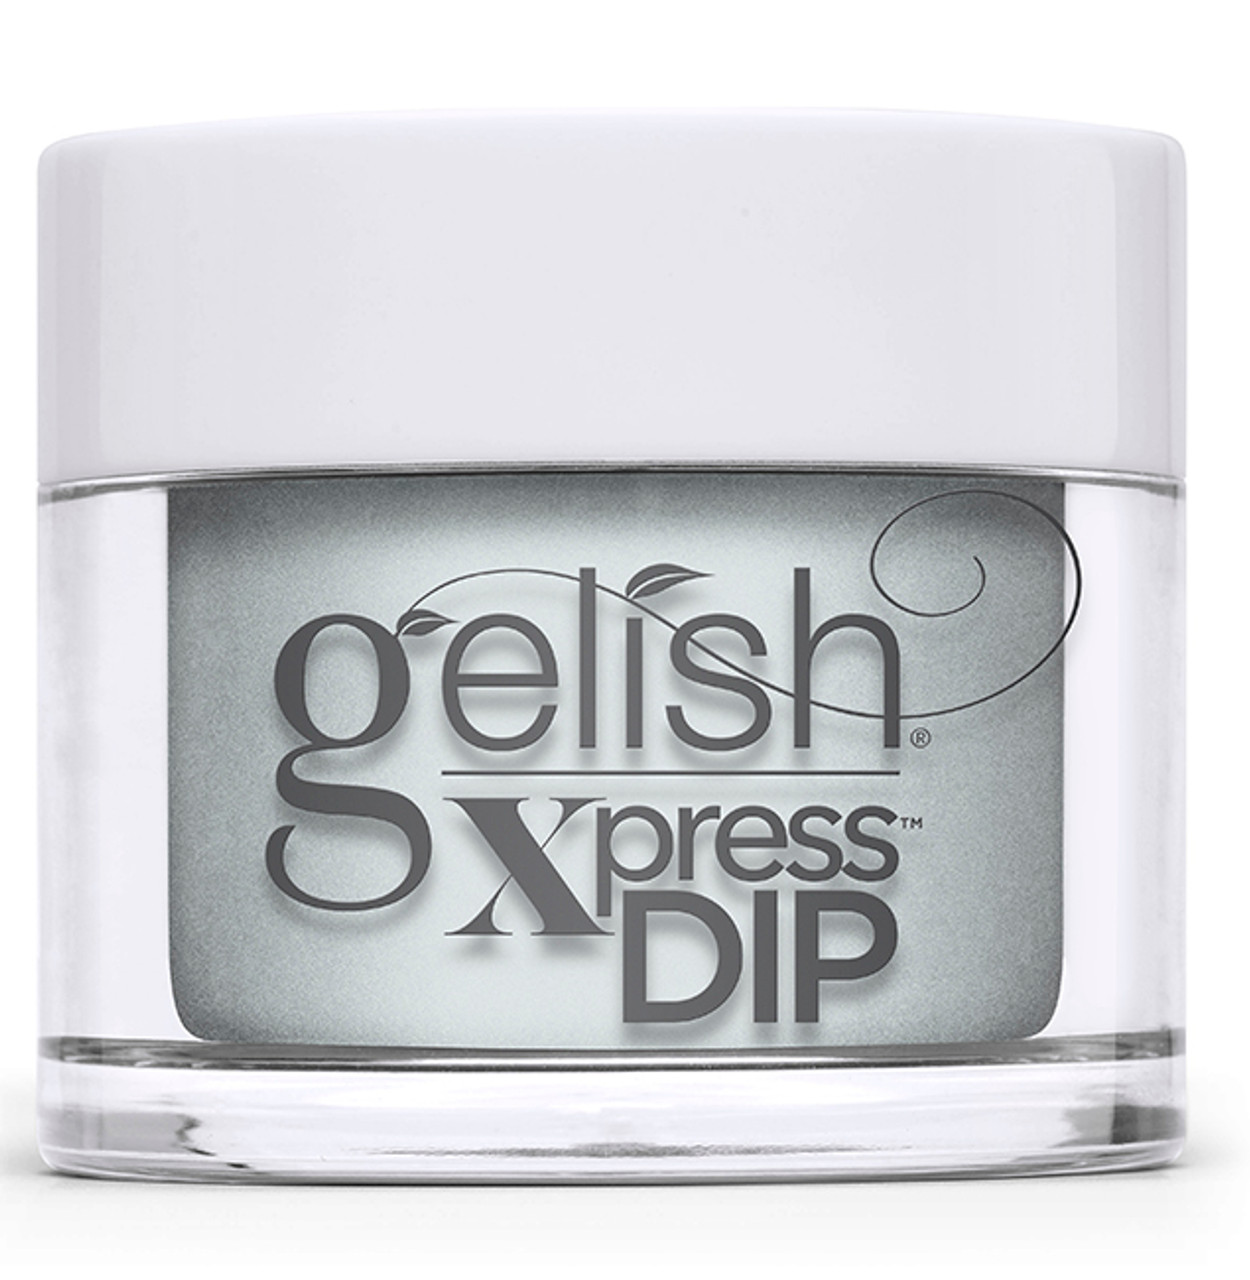 Gelish Xpress Dip In The Clouds - 1.5 oz / 43 g